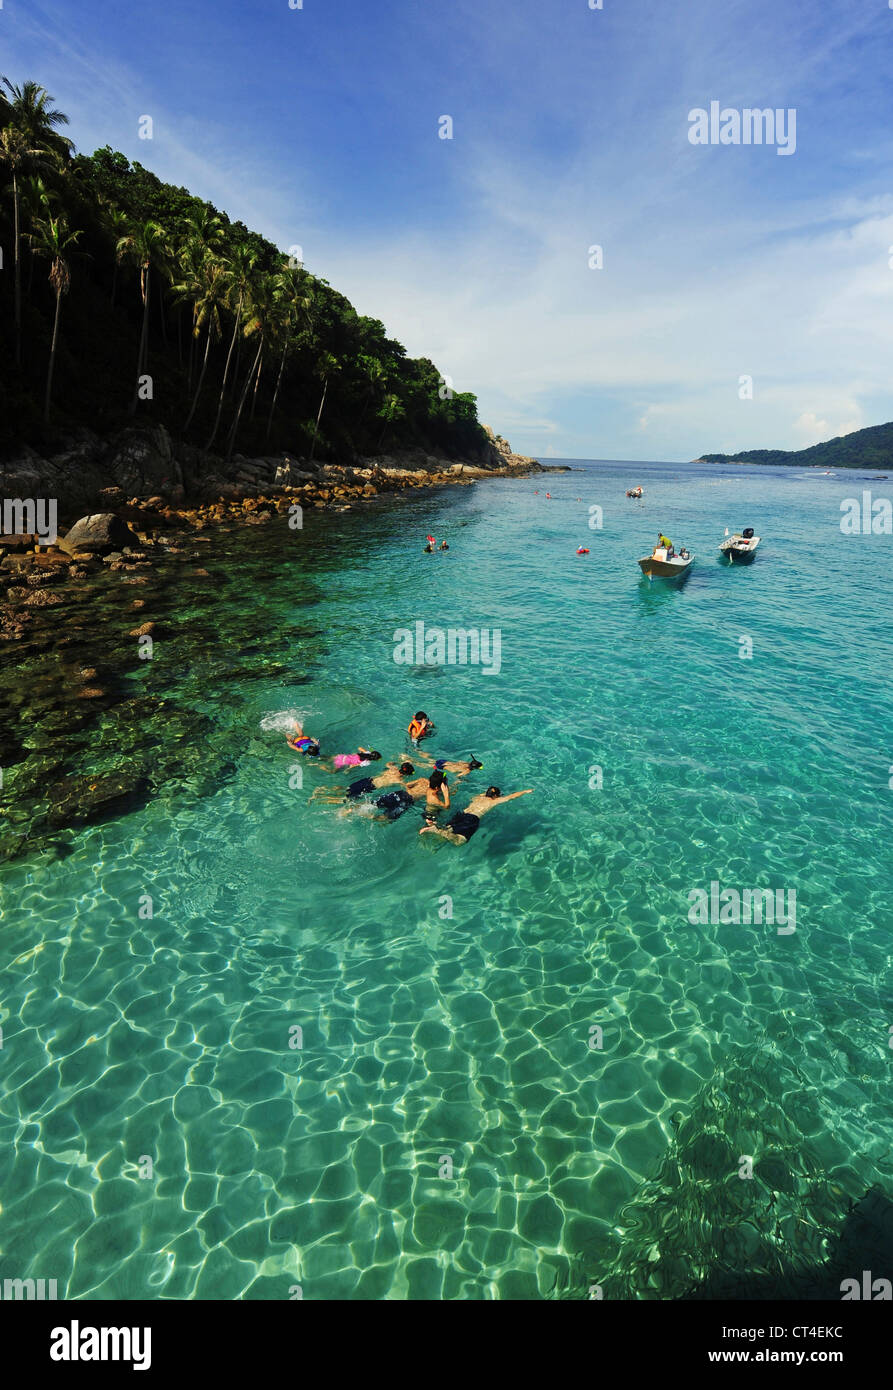 Malaysia, Perhentian Islands, Perhentian Kecil, tourist snorkeling in turquoise water Stock Photo